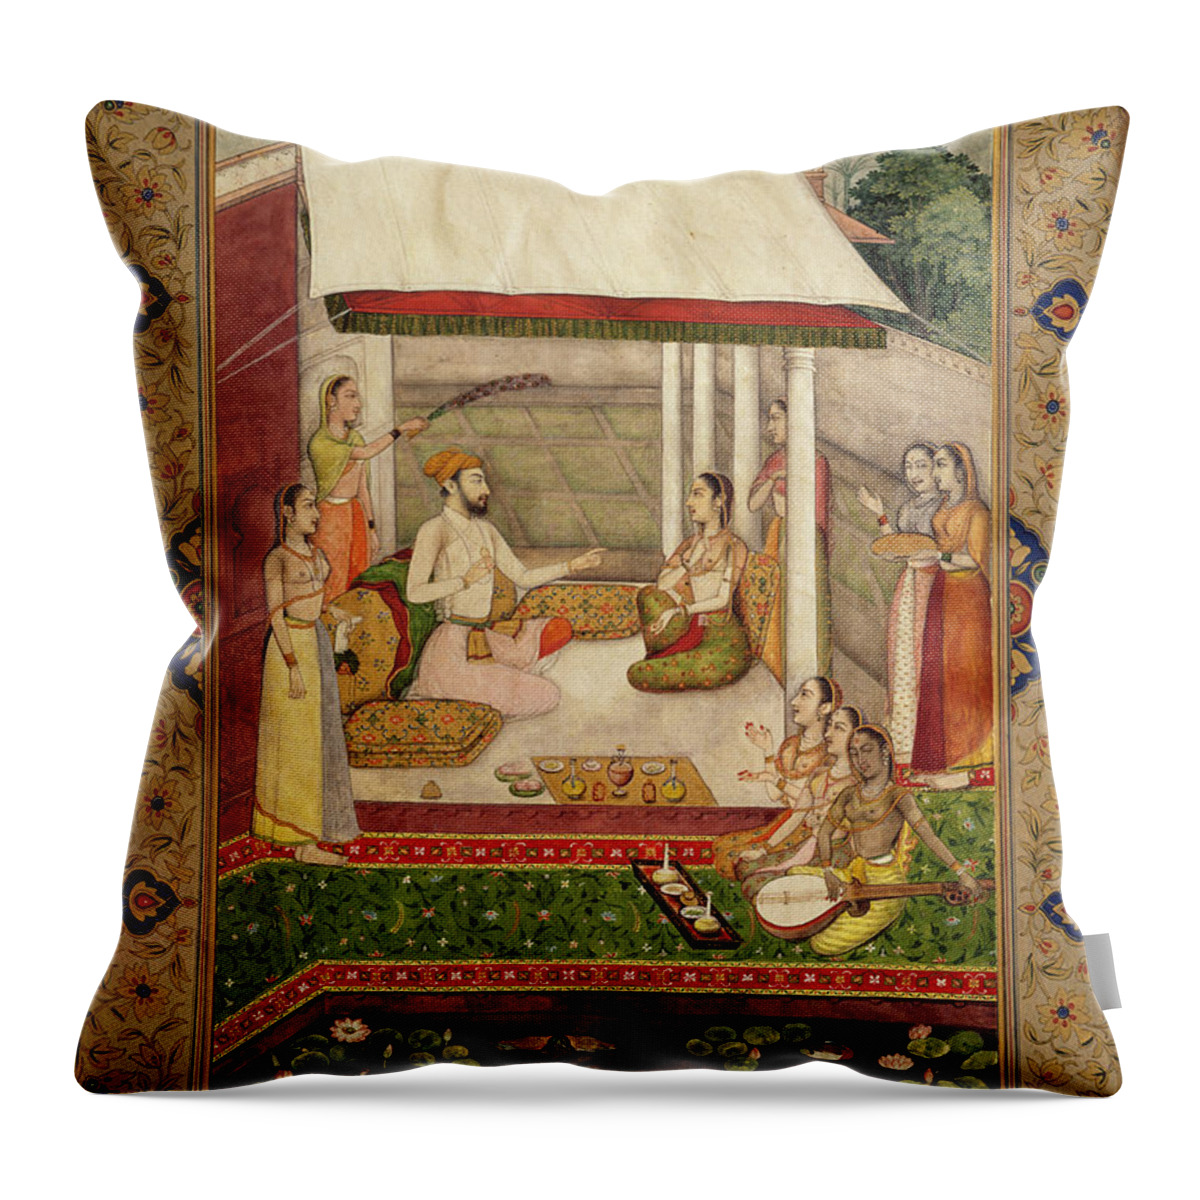 Fresco Throw Pillow featuring the painting A Prince And Princess Listening To Music by Indian School